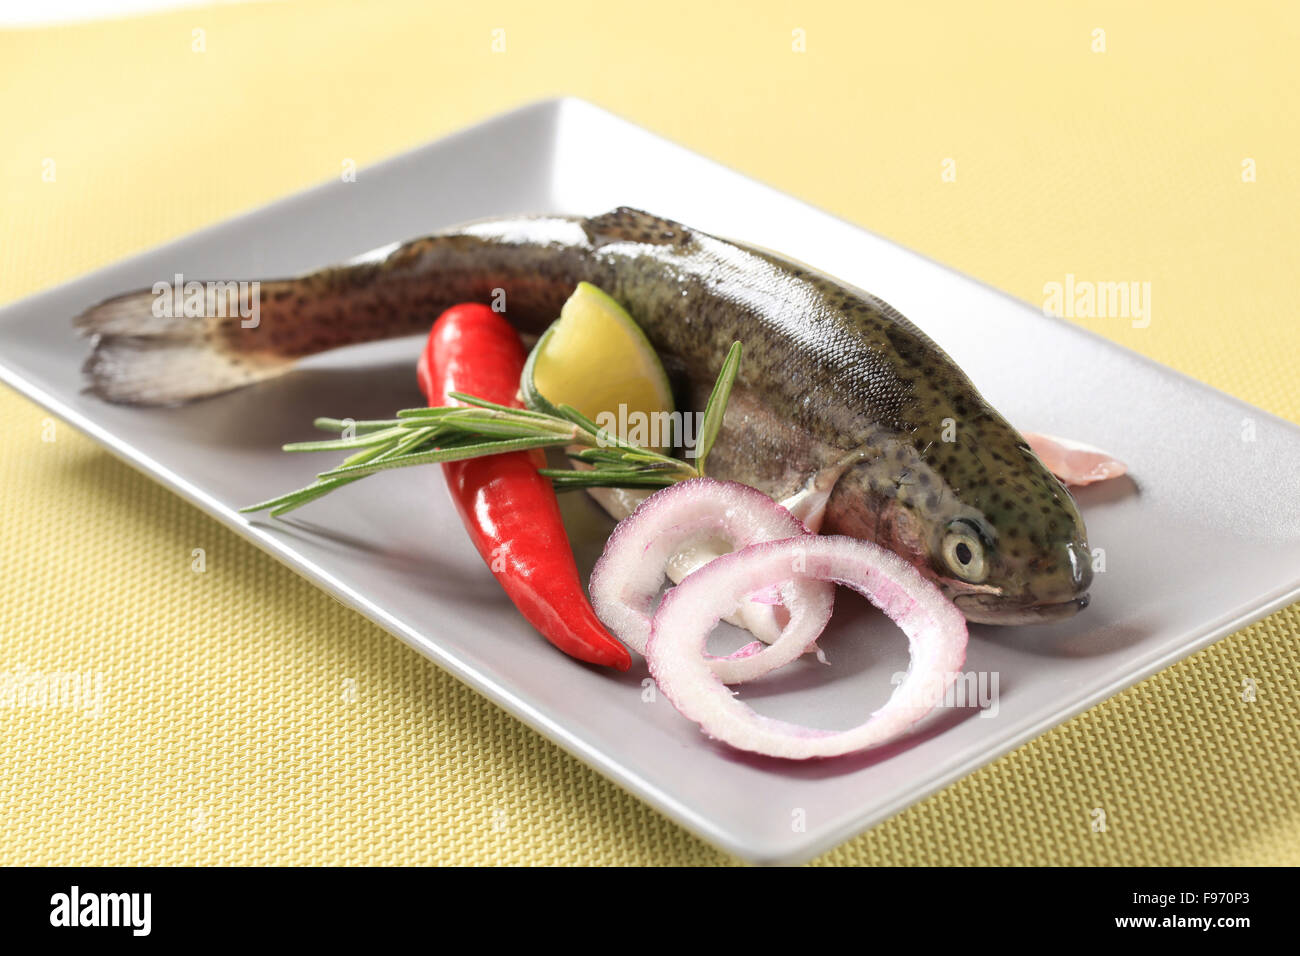 Fresh trout and other ingredients on a plate Stock Photo